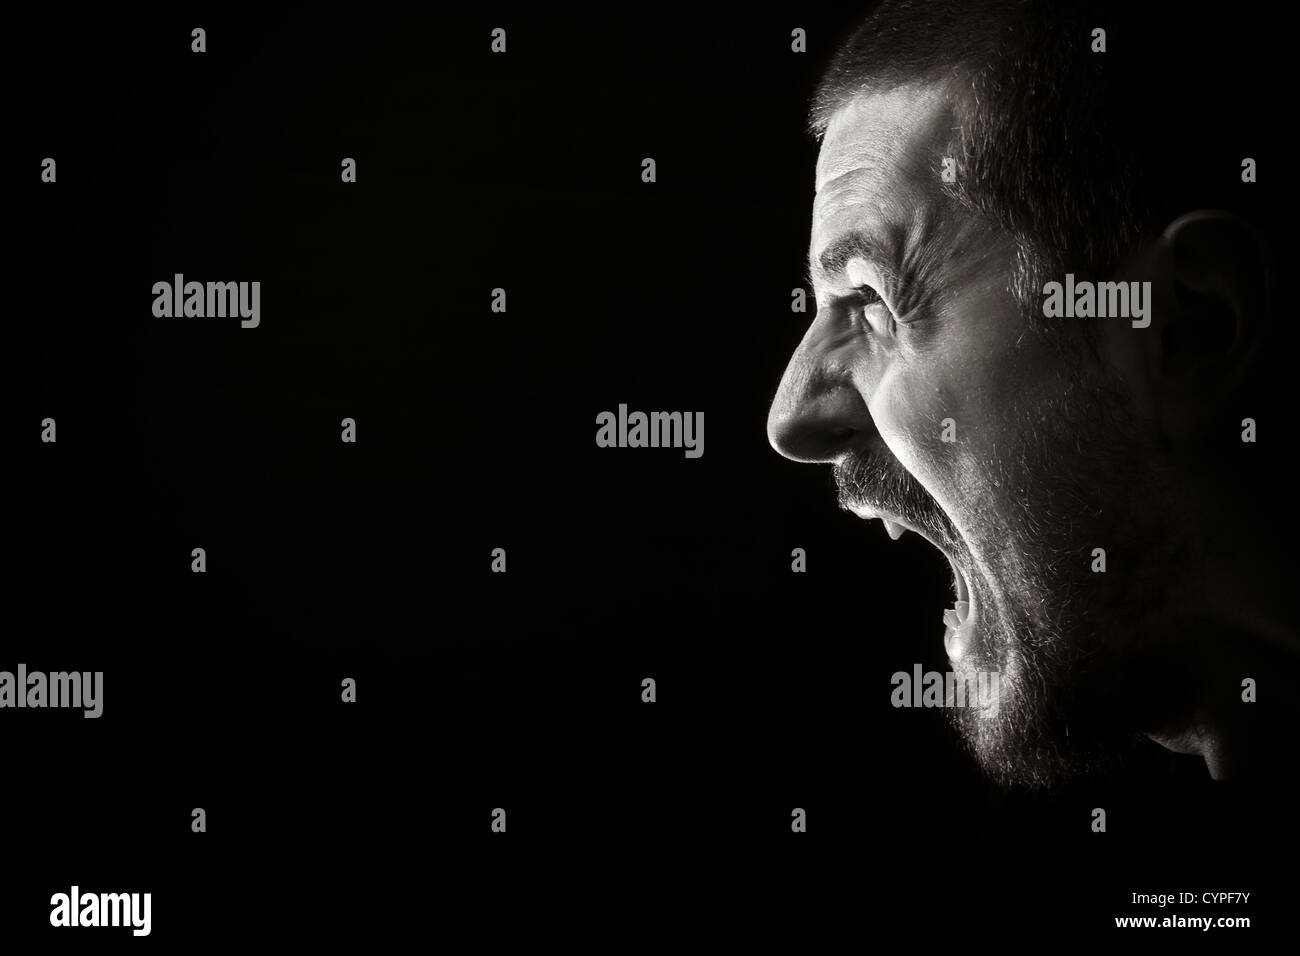 Portrait of screaming angry man on black background Stock Photo